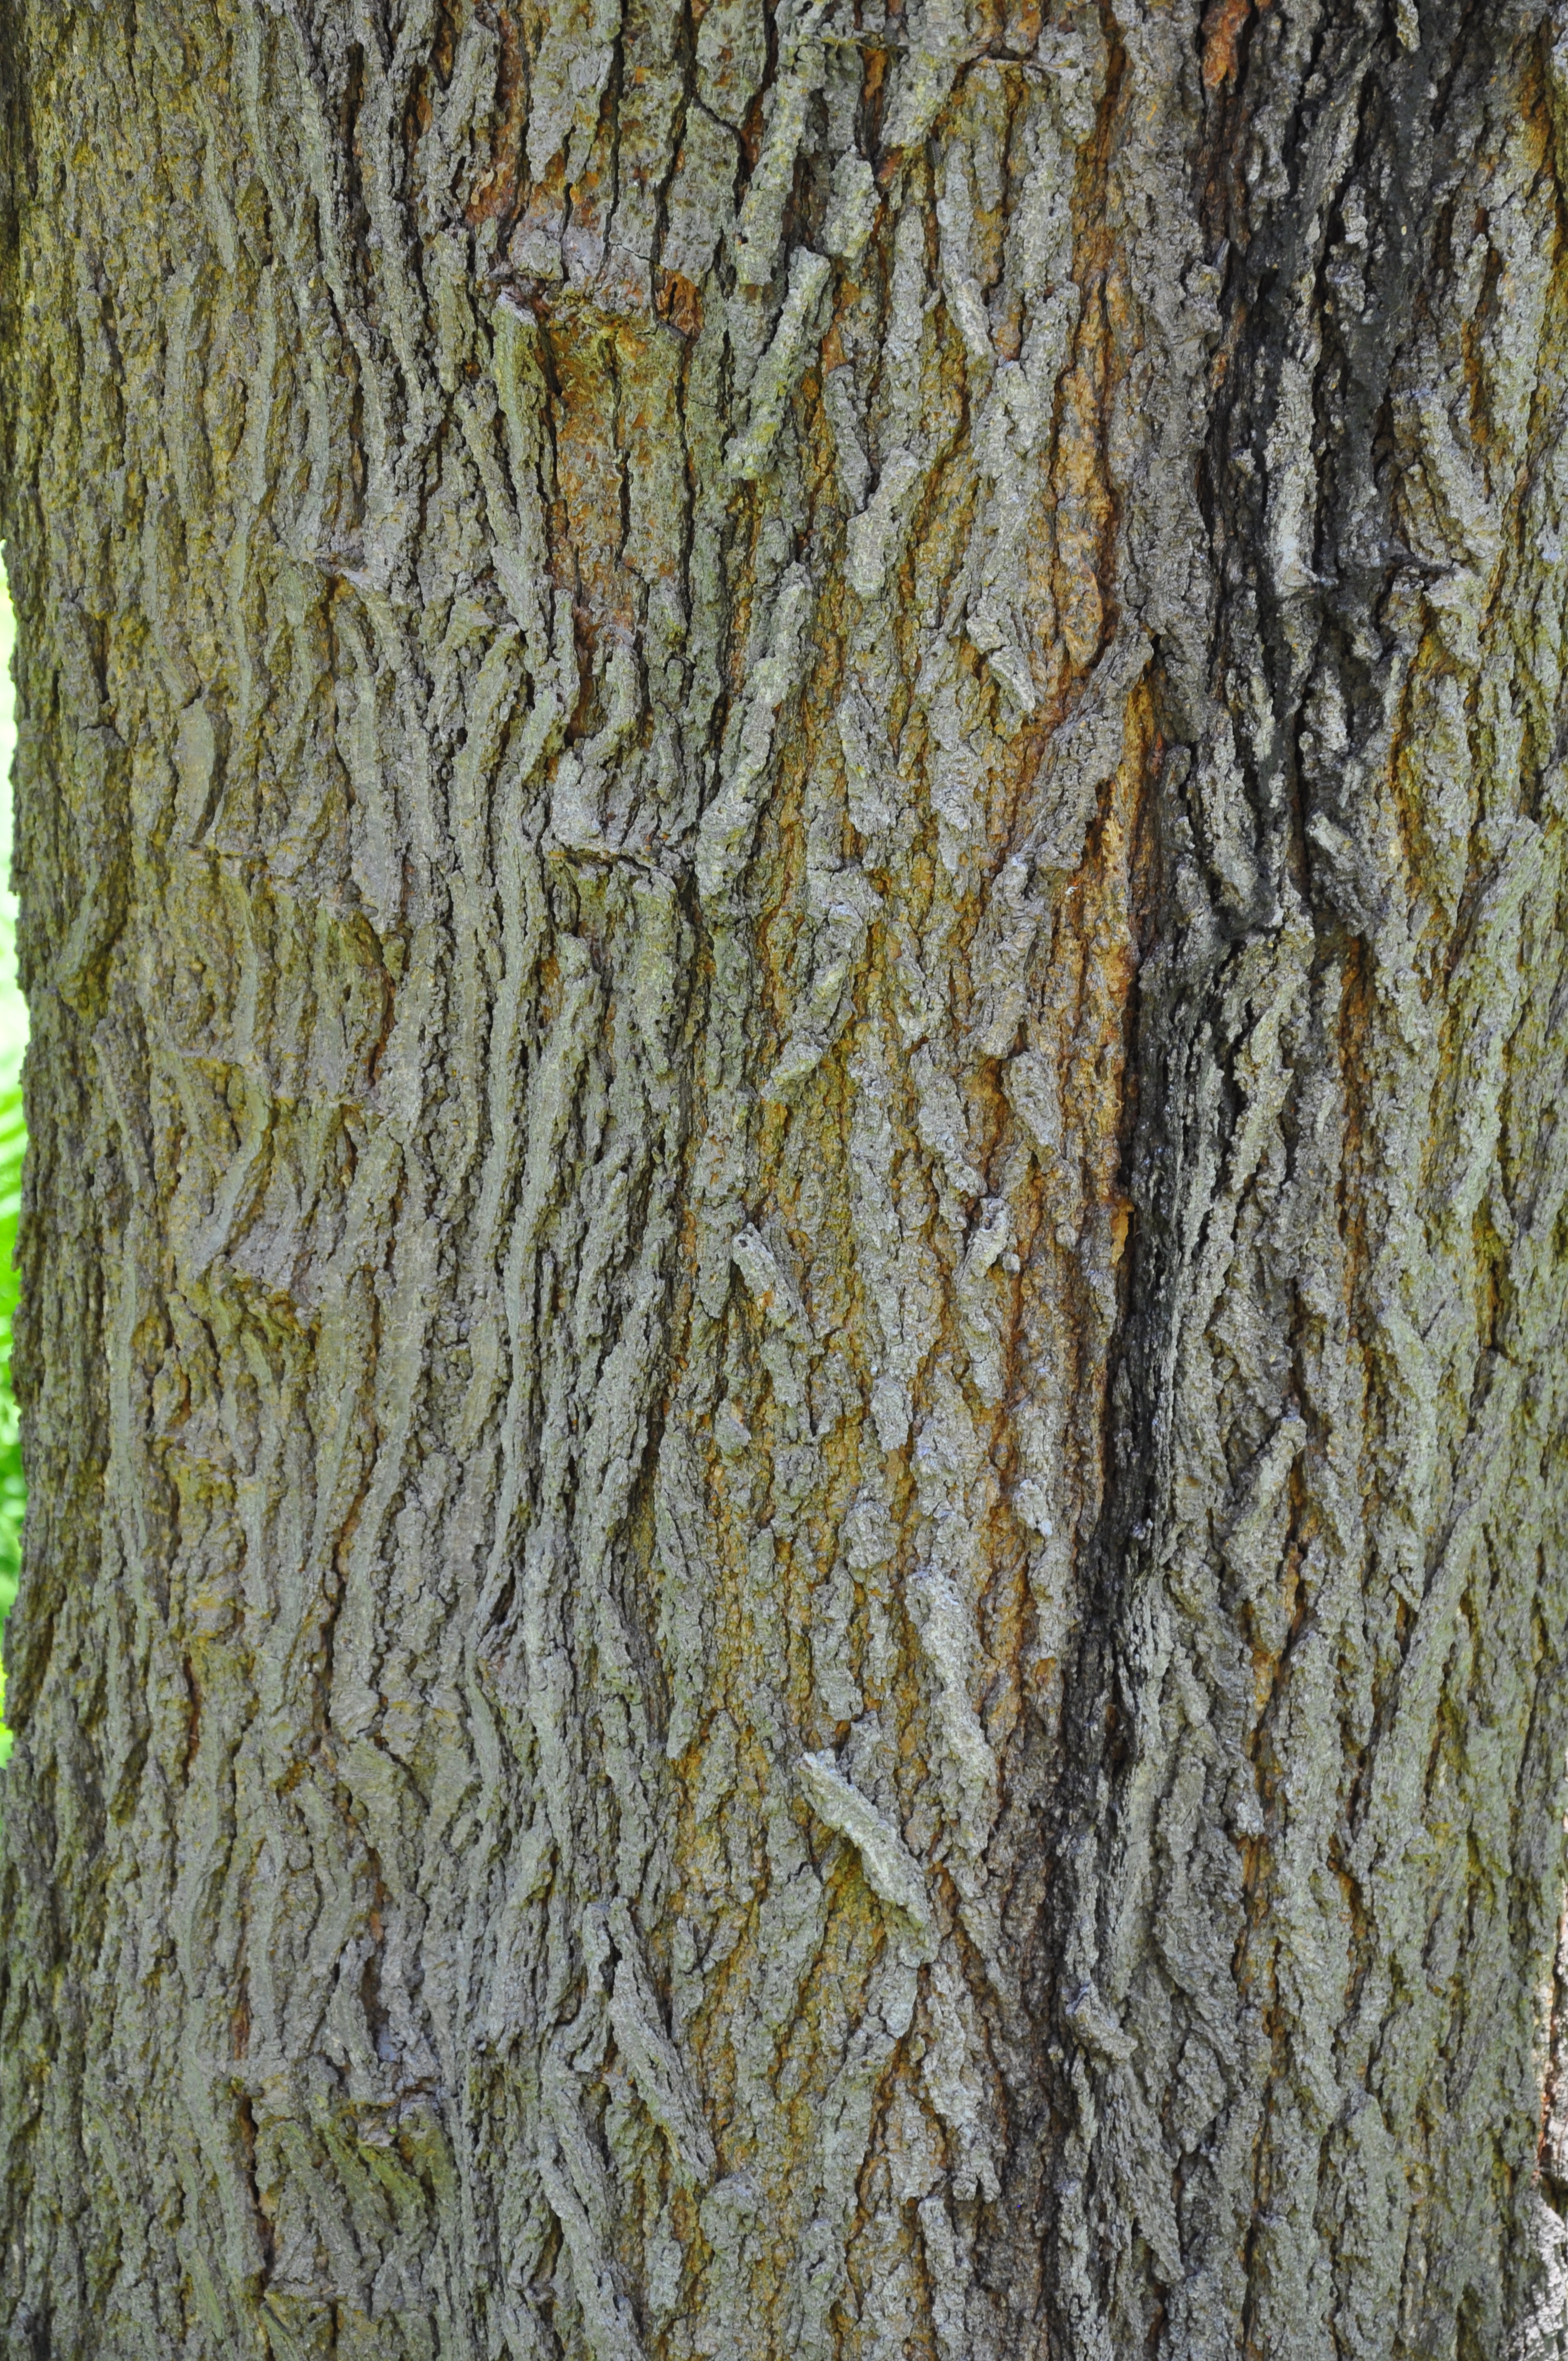 Red Mulberry bark